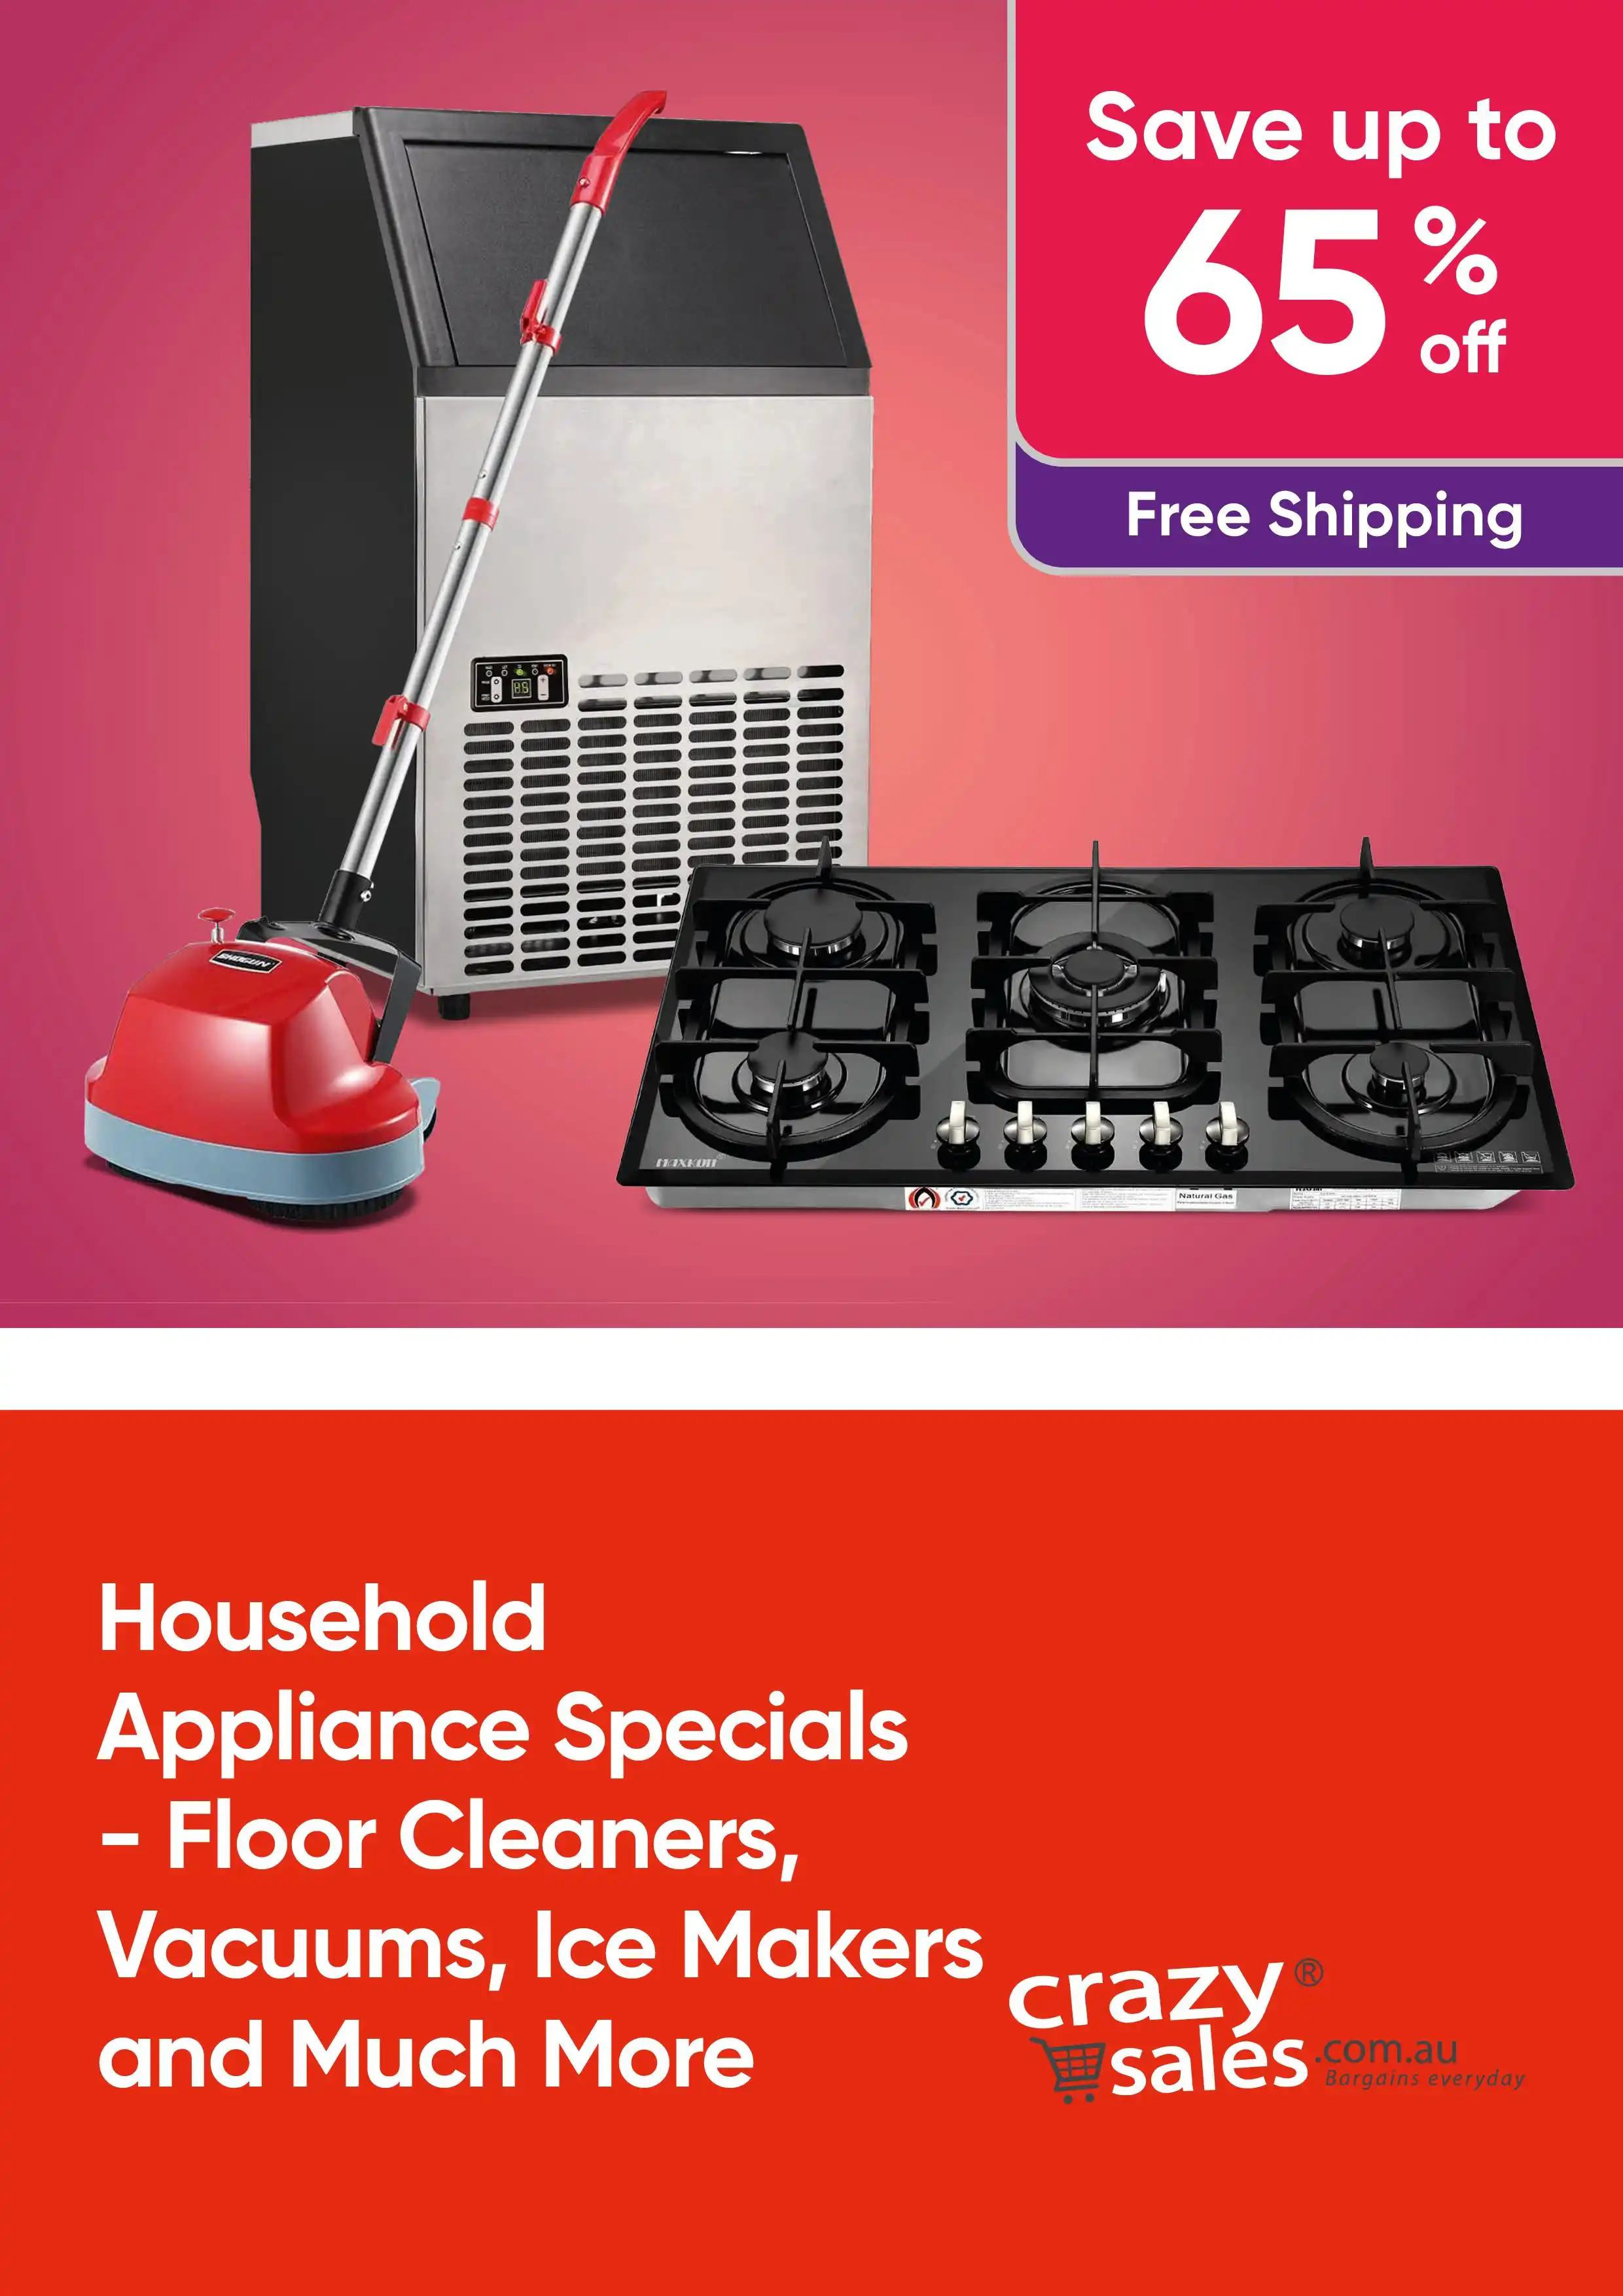 Save Up To 65% Off Household Appliances - Shop Specials On Floor Cleaners, Vacuums and Much More